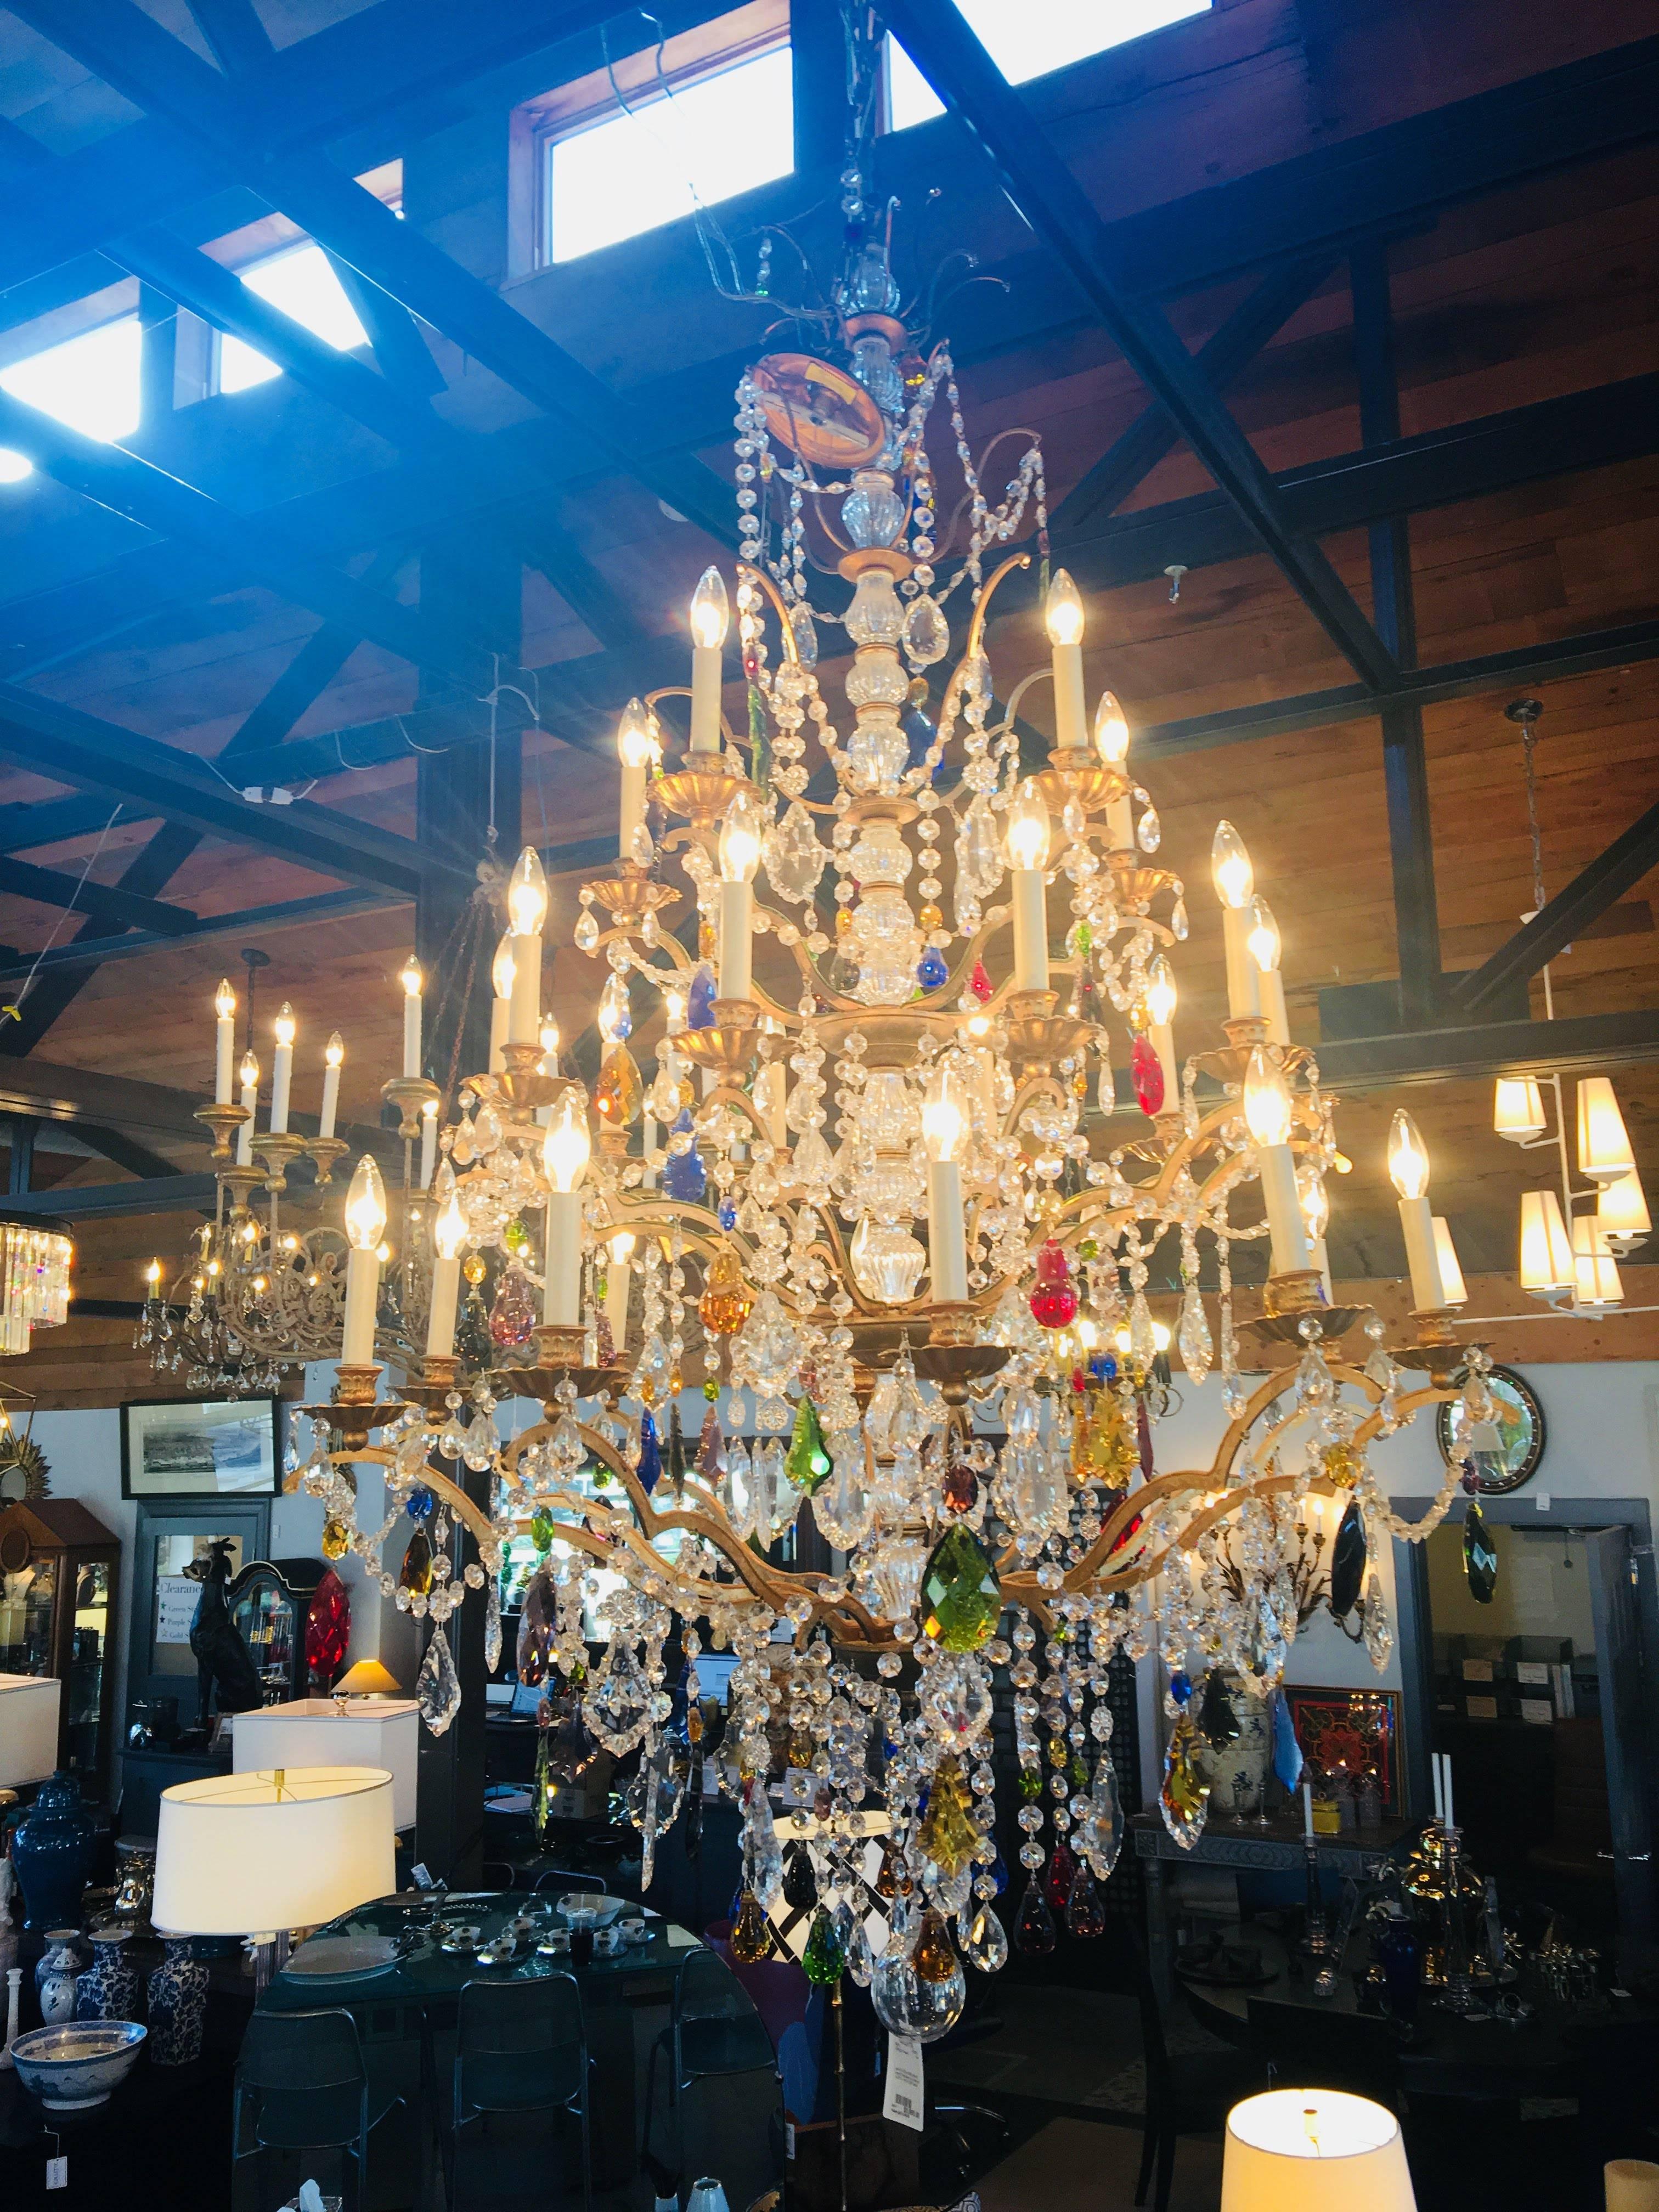 Louis XIV style multicolored crystal chandelier by Schonbek
Measure: 64.5 inches high x 40 inches wide
Chain 126 inches. Retails at $12,000.